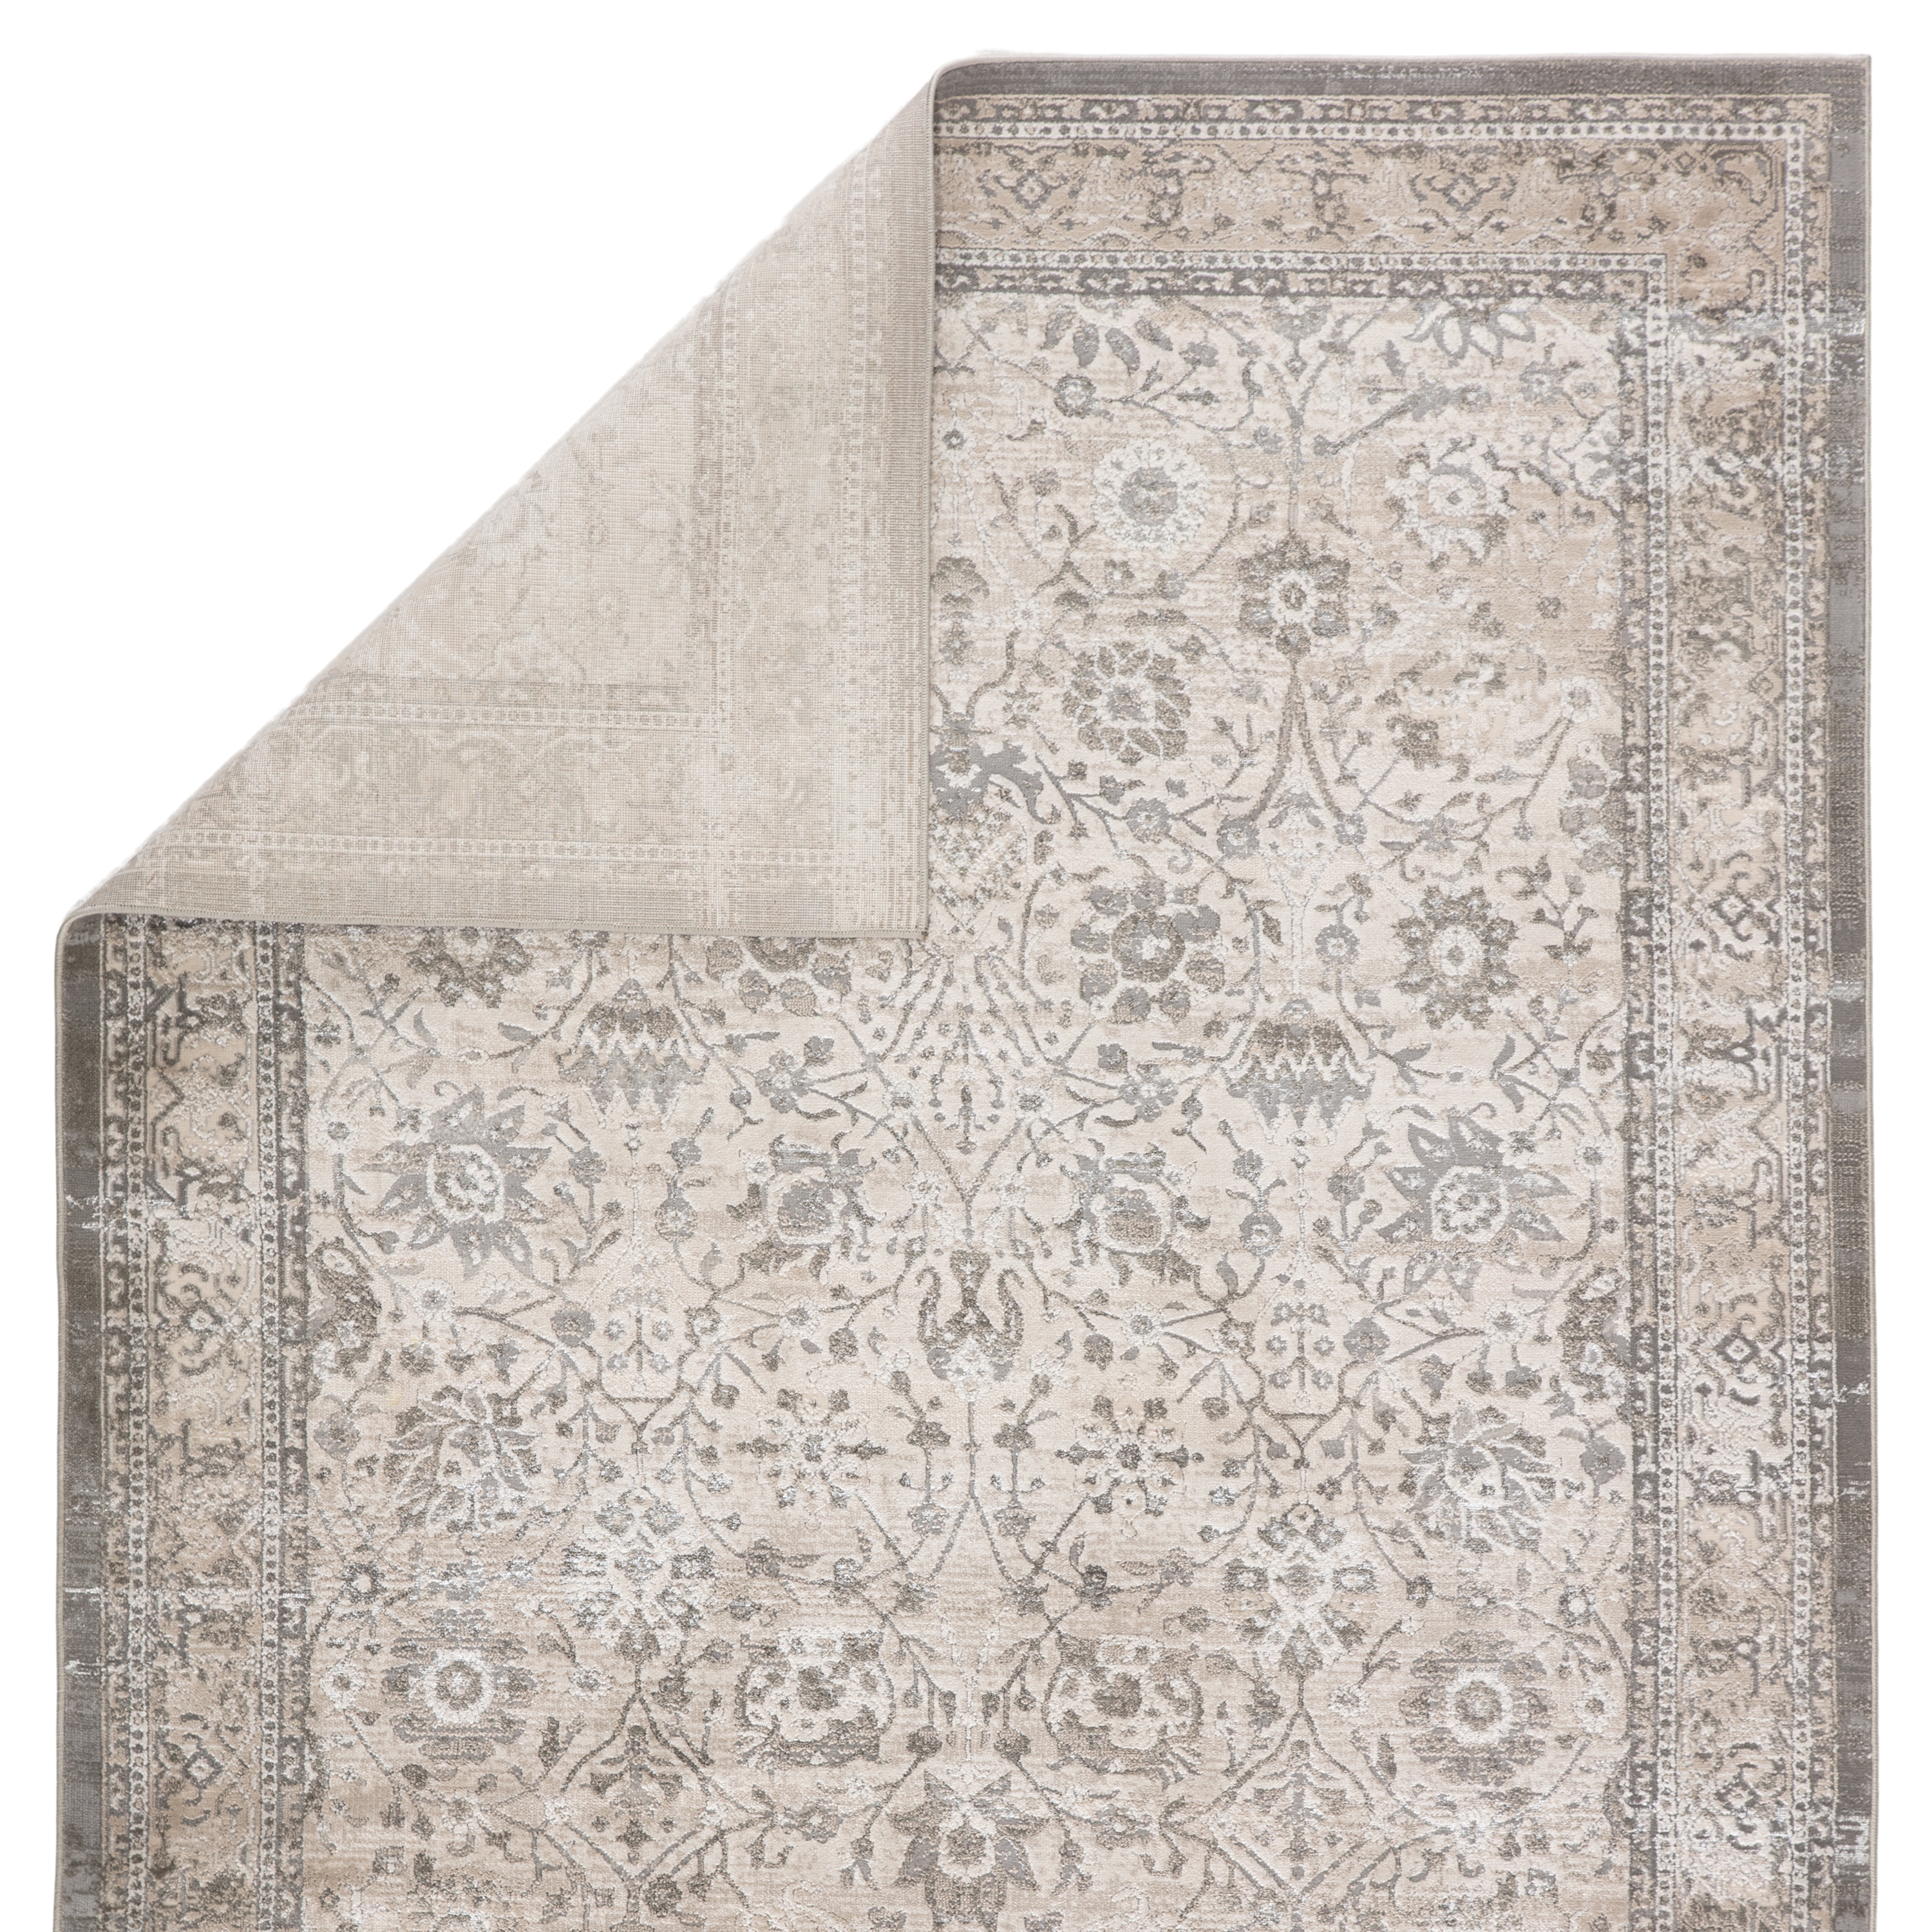 Vibe by Odel Oriental Gray/ White Area Rug (6'7"X9'6") - Image 2